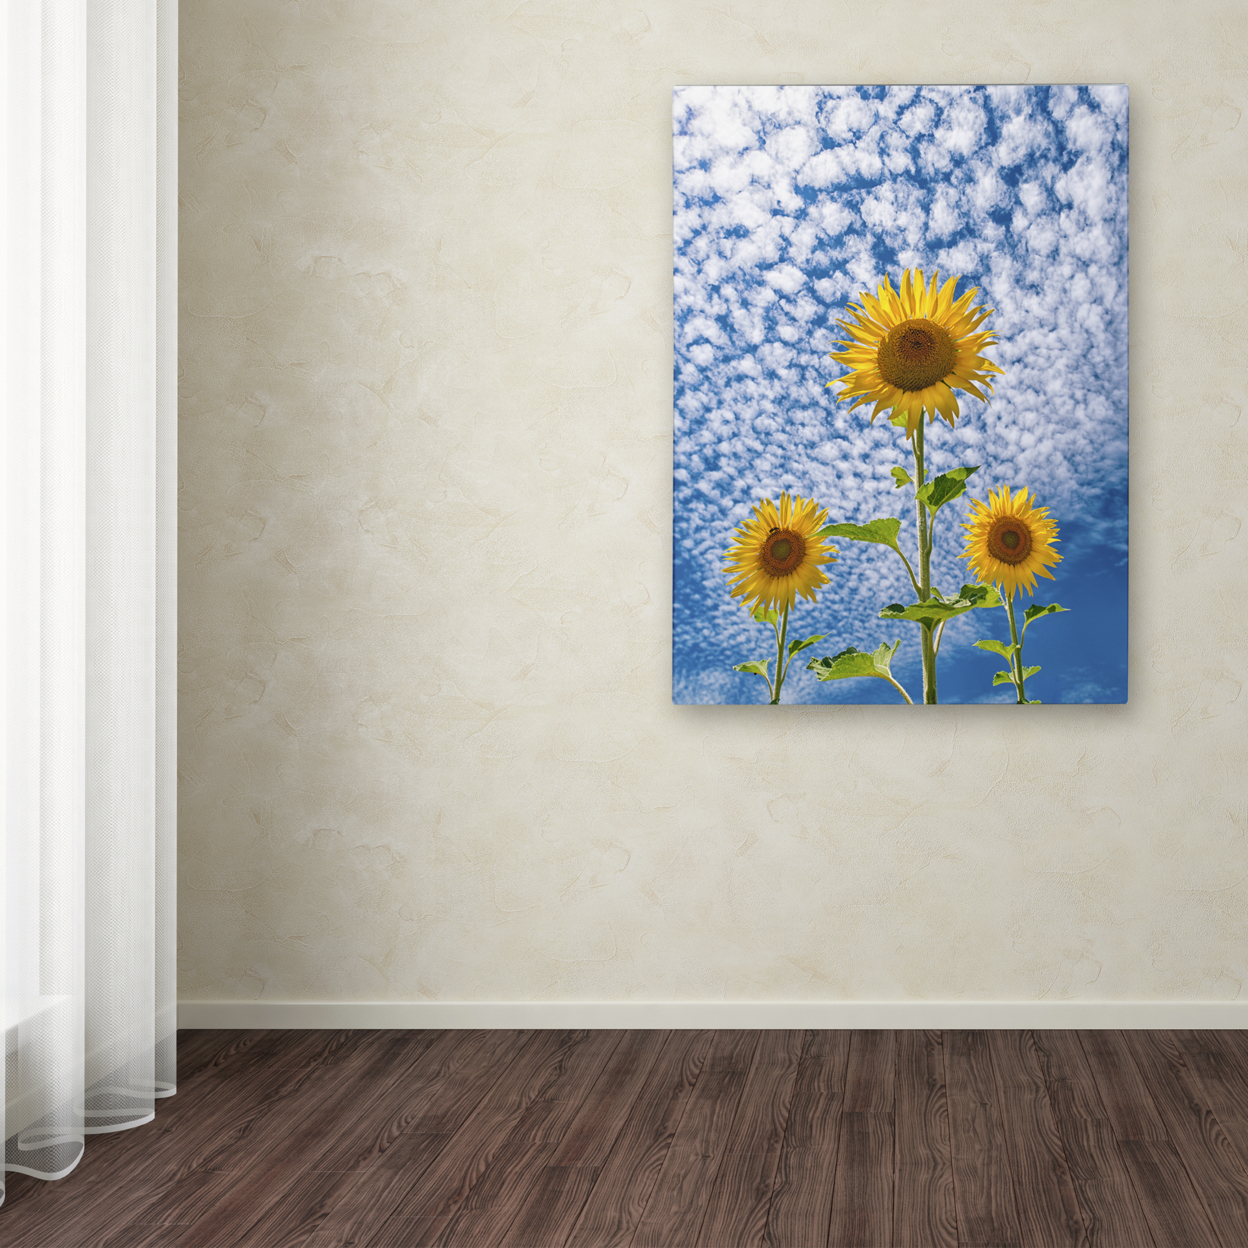 Michael Blanchette Photography 'Sunflower Triad' Canvas Wall Art 35 X 47 Inches